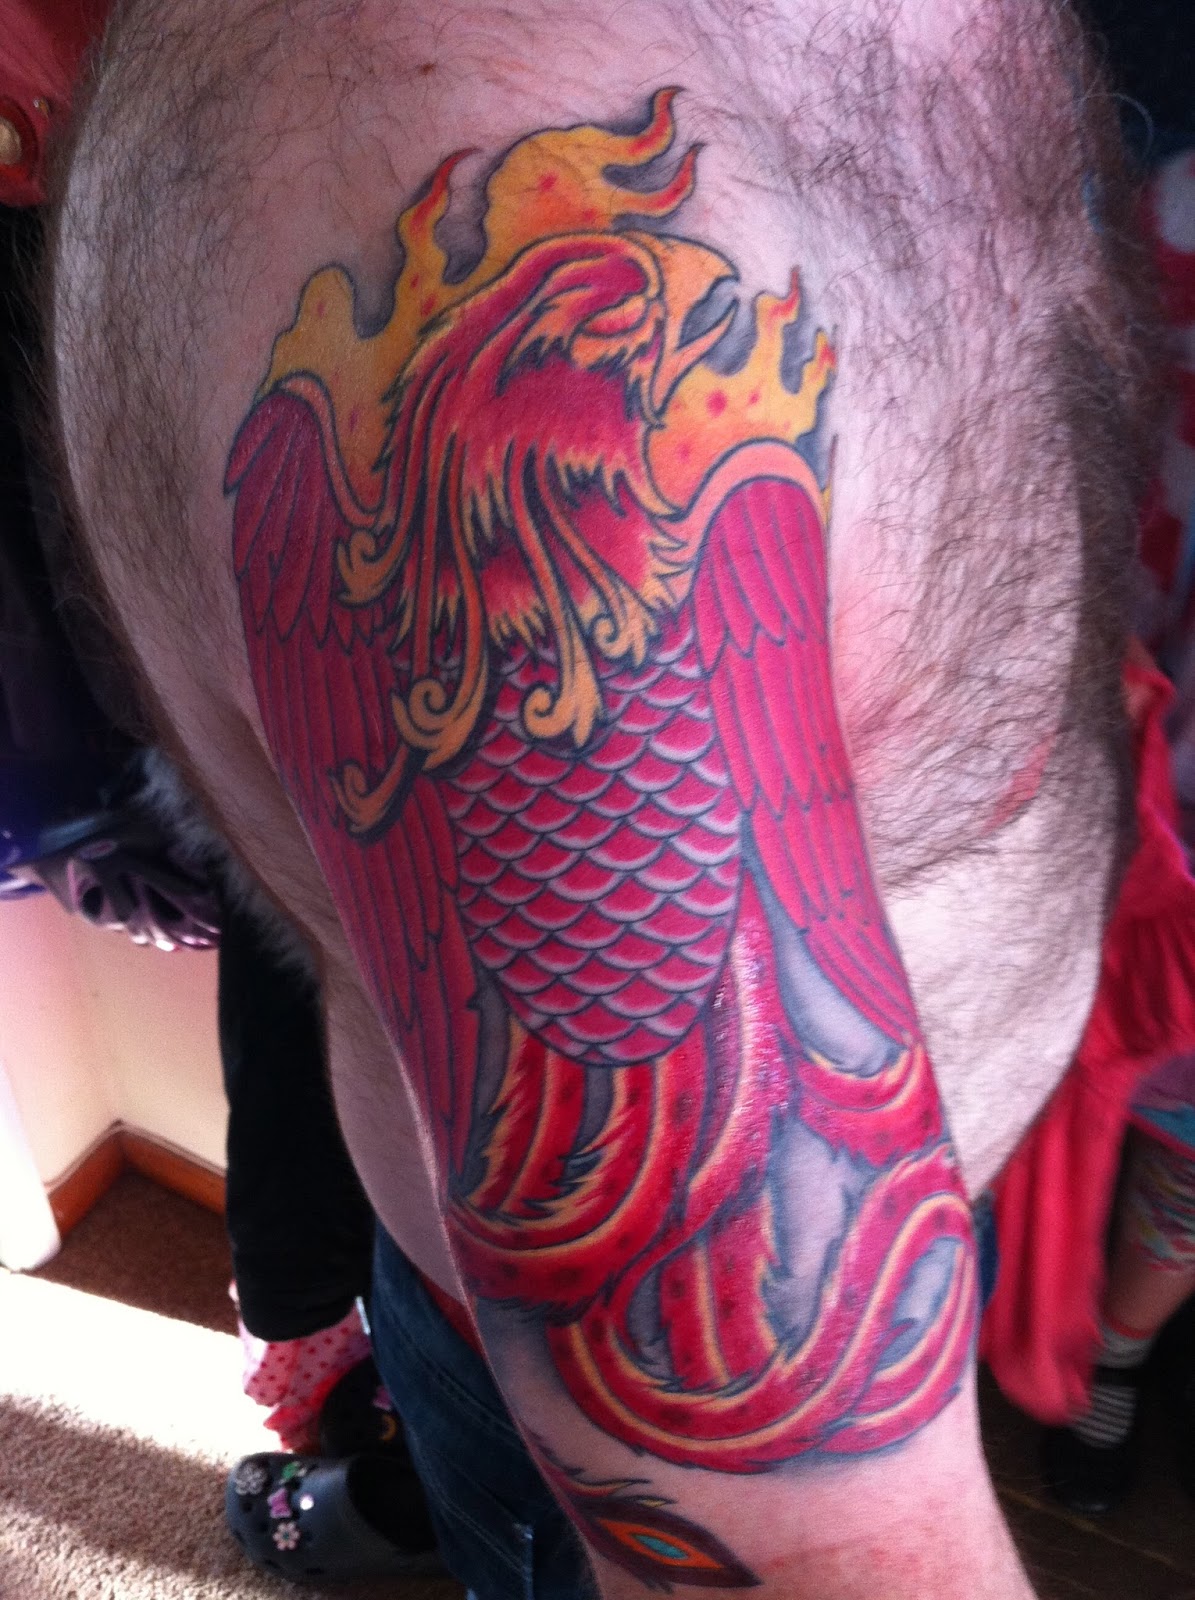 Yet another tattoo (work in progress…)